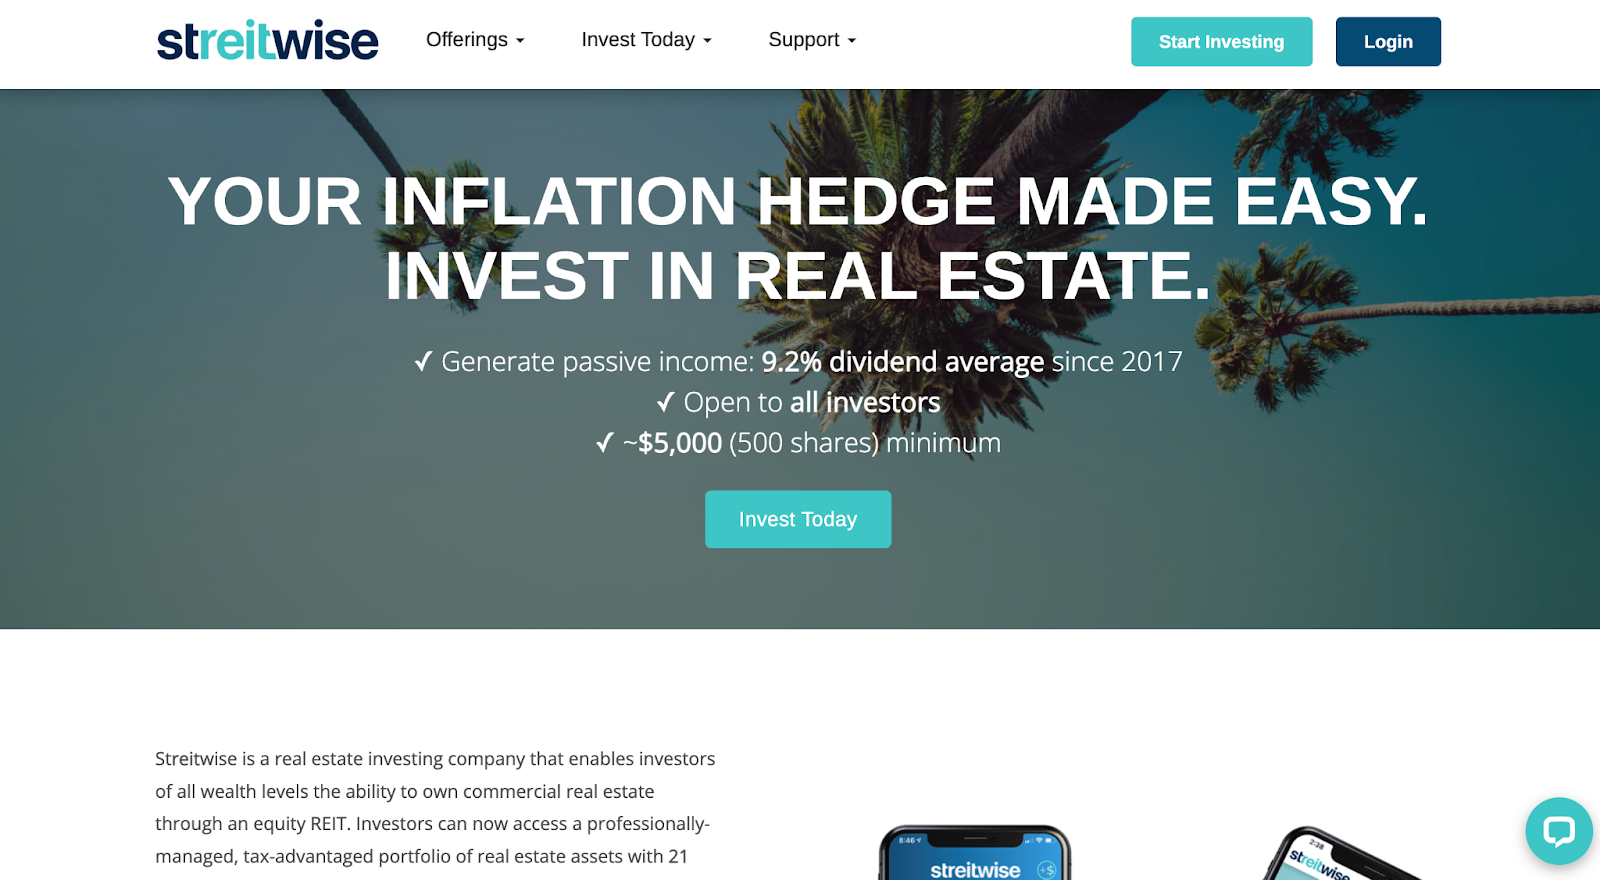 Steitwise home page